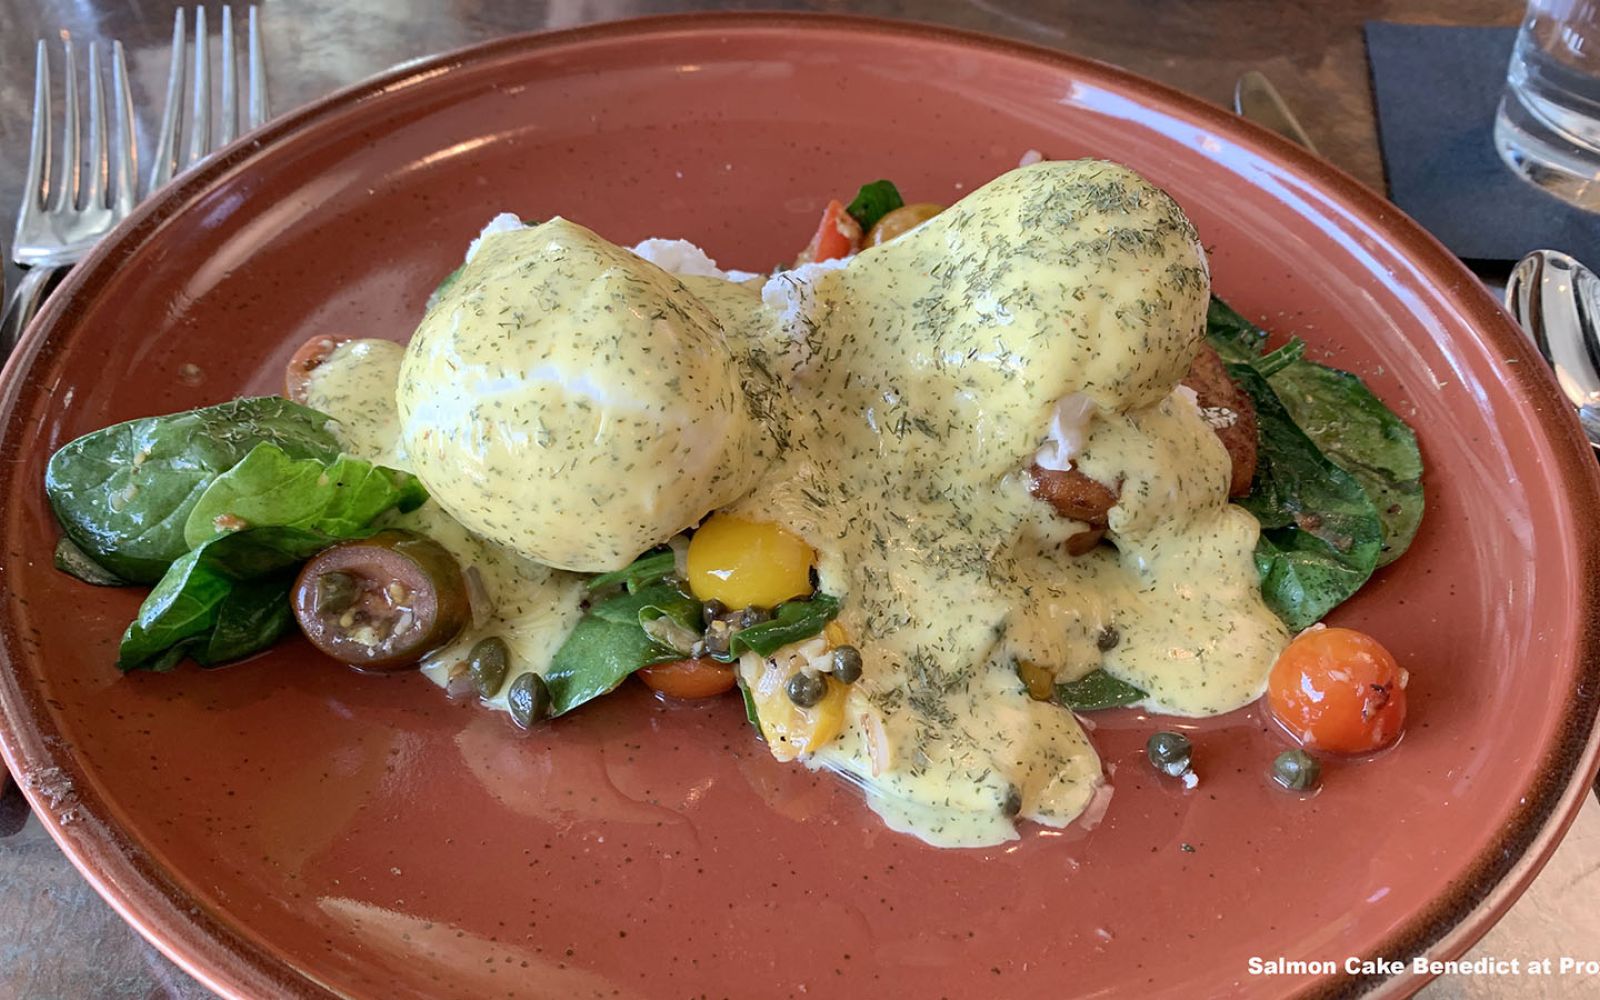 Salmon Cake Benedict is a brunch item worth checking out at Proximo.